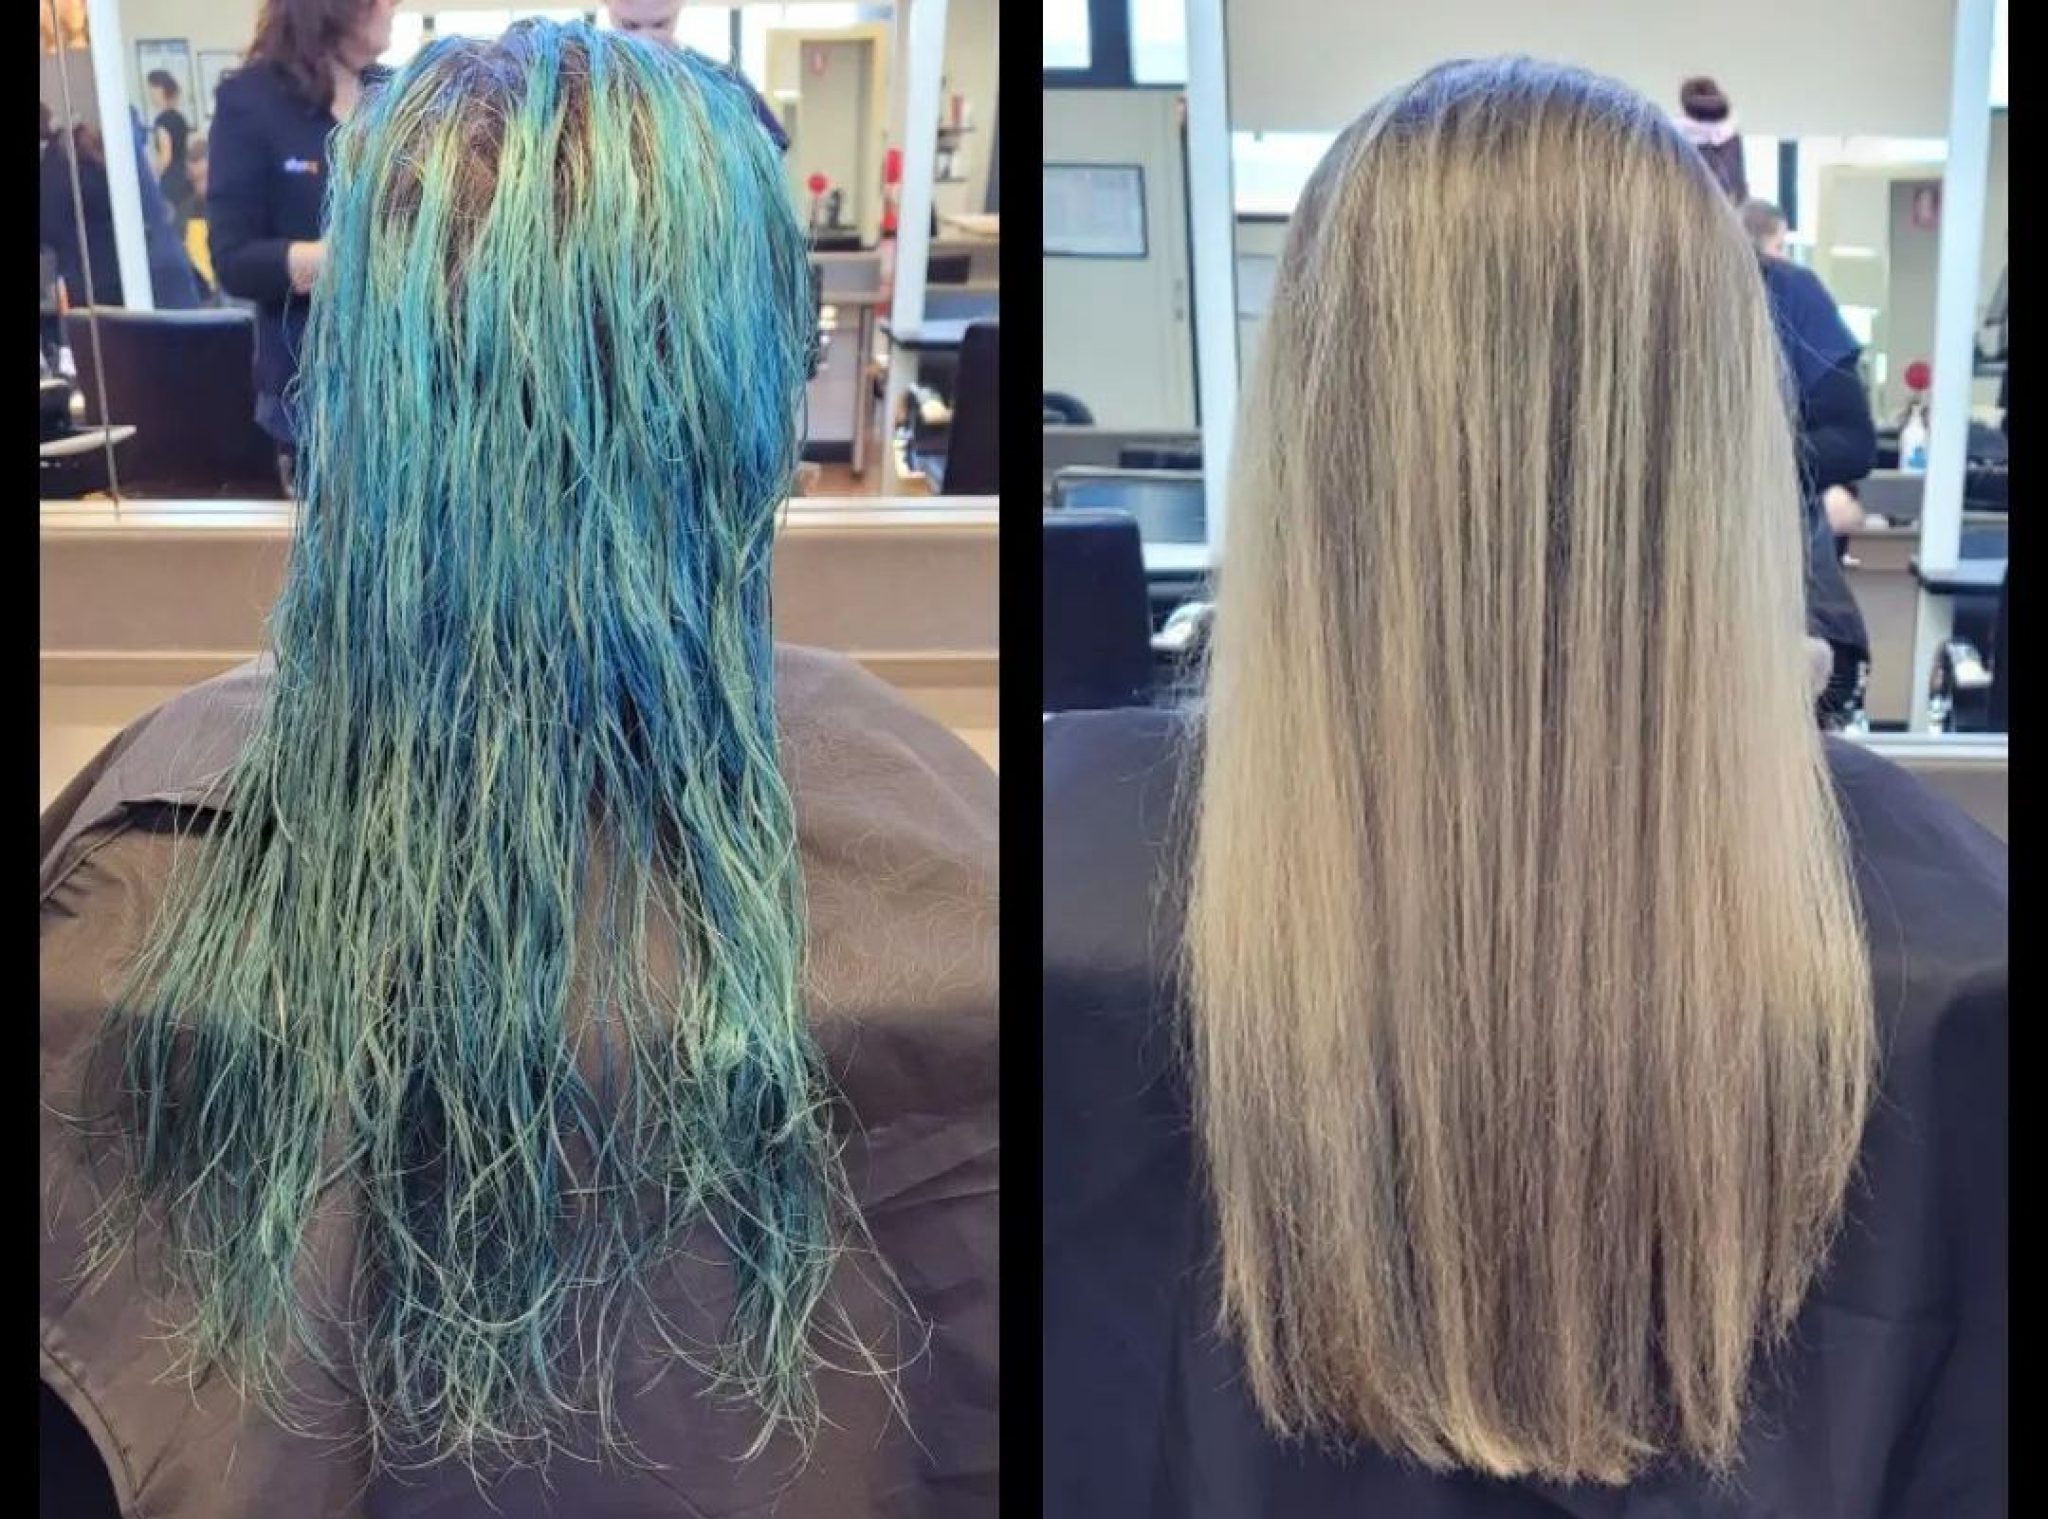 1. How to Remove Blue Hair Dye at Home - wide 5